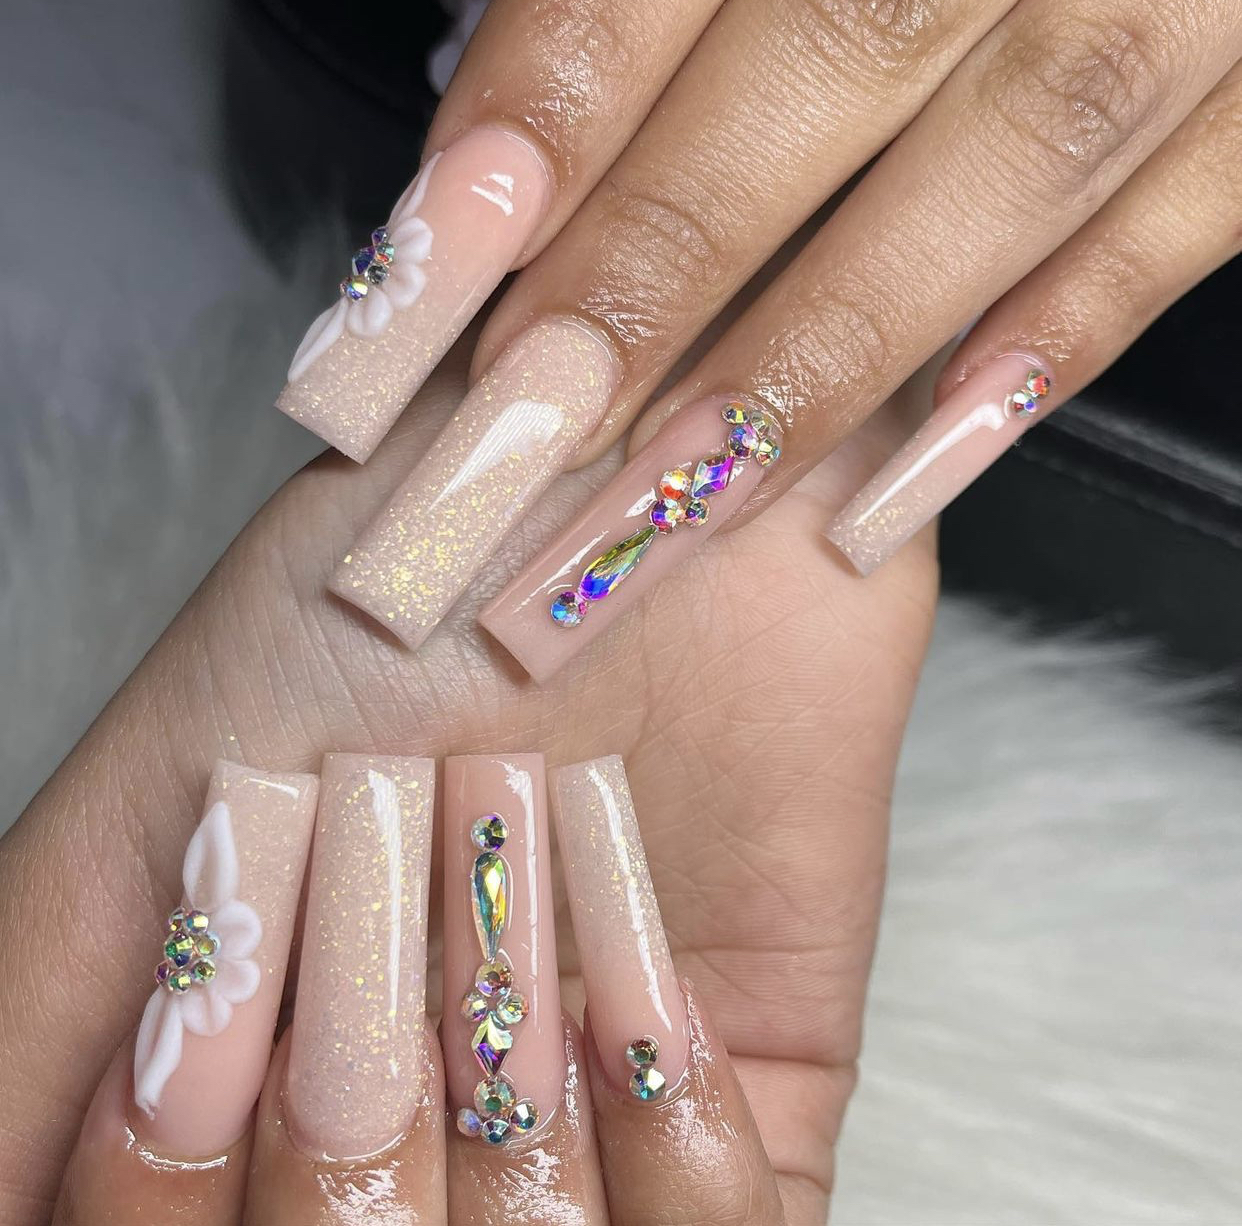 Acrylic Nails With Flower Patterns And Stones